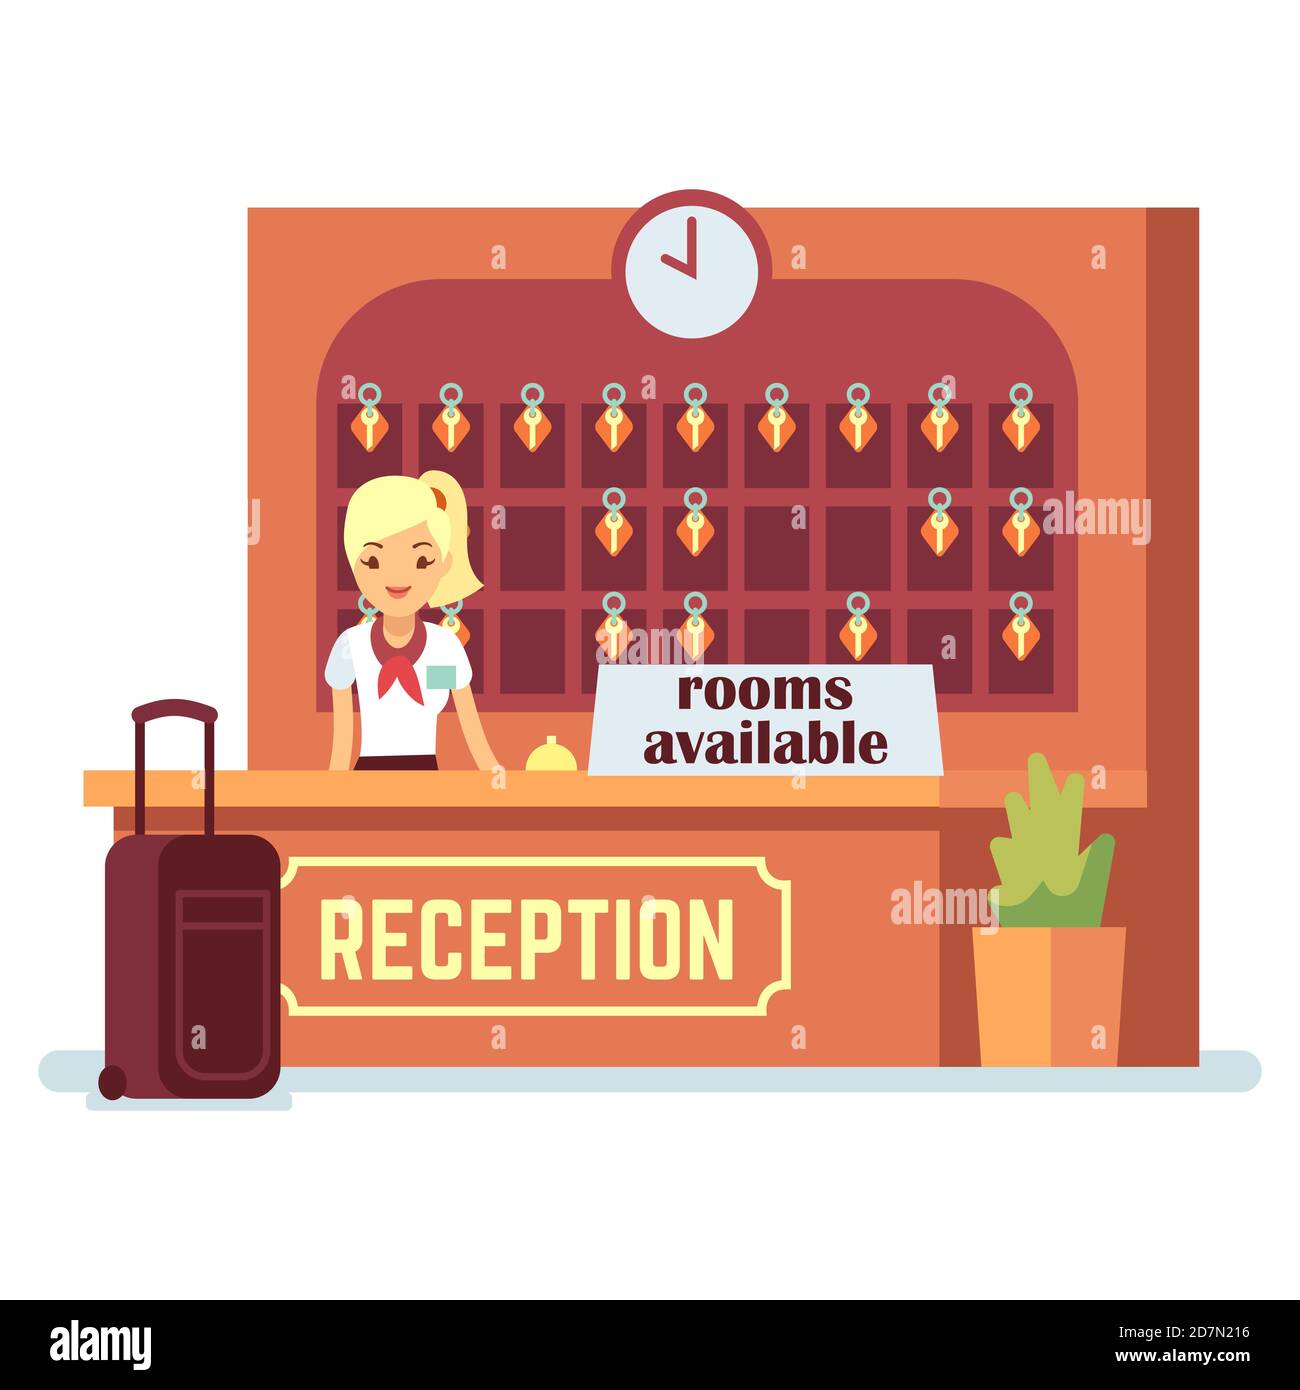 Rooms available vector illustration. Cartoon character girl and check-in desk in hotel or hostel. Room available on check desk service Stock Vector